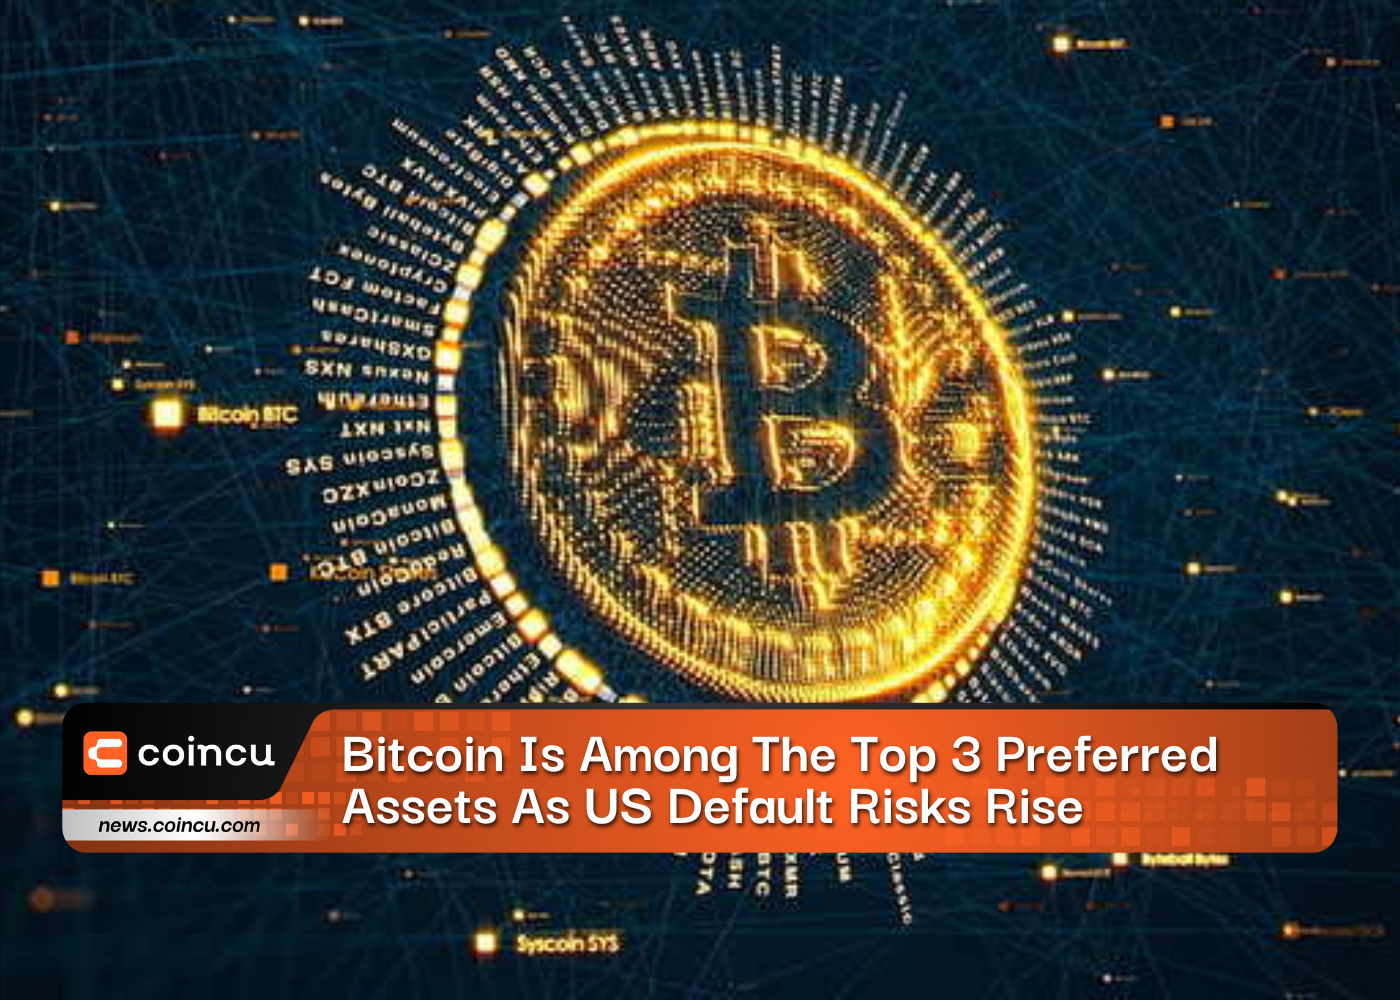 Bitcoin Is Among The Top 3 Preferred Assets As US Default Risks Rise